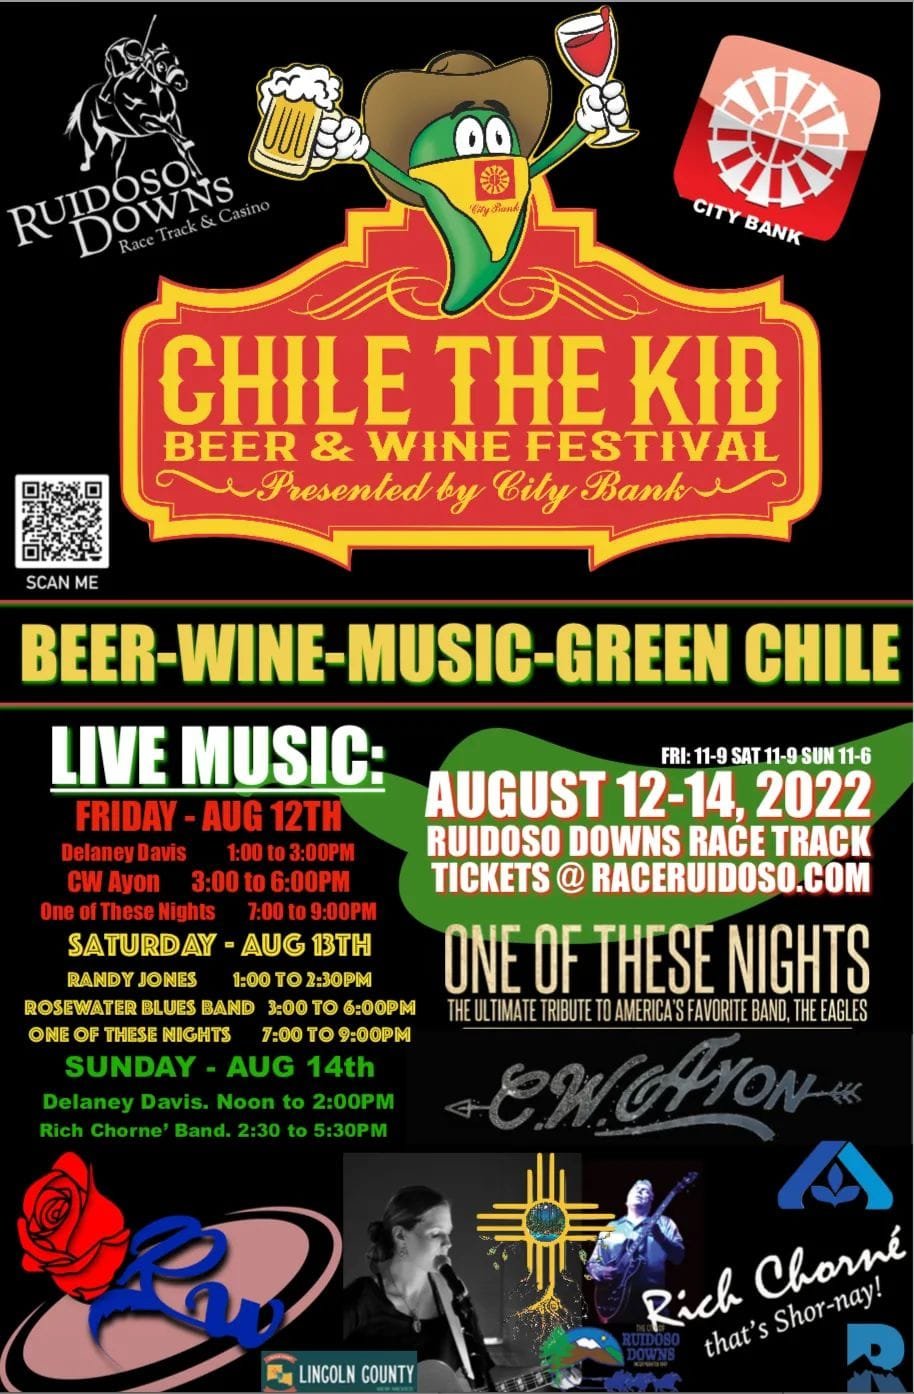 Chile The Kid Wine and Beer Festival at Ruidoso Downs Race Track